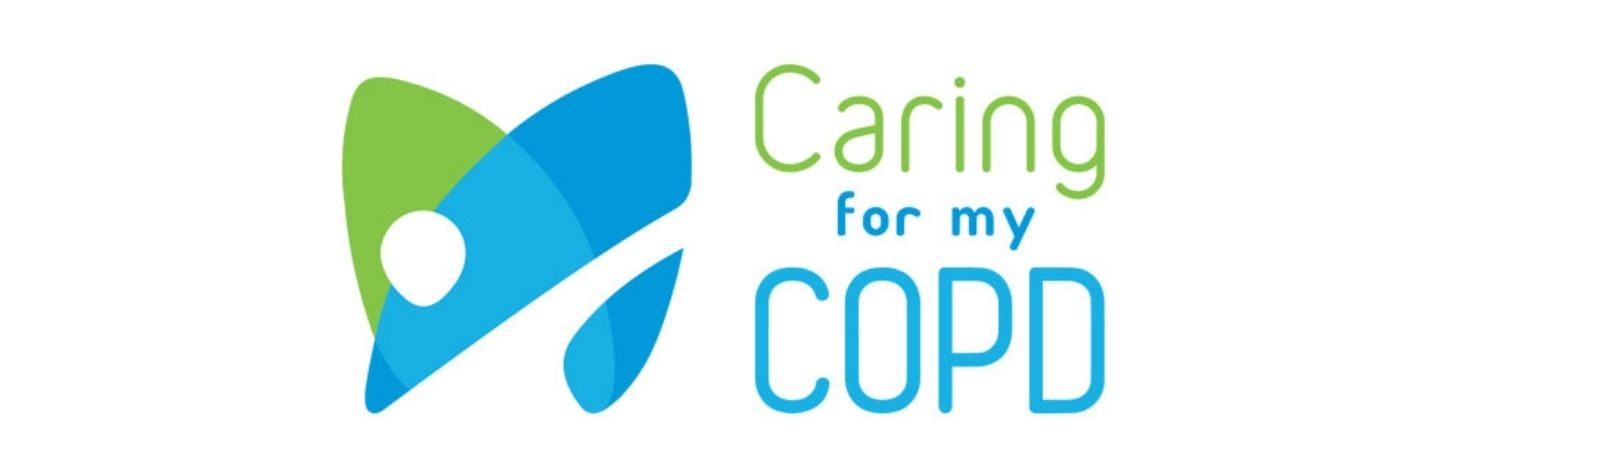 Caring for my COPD logo